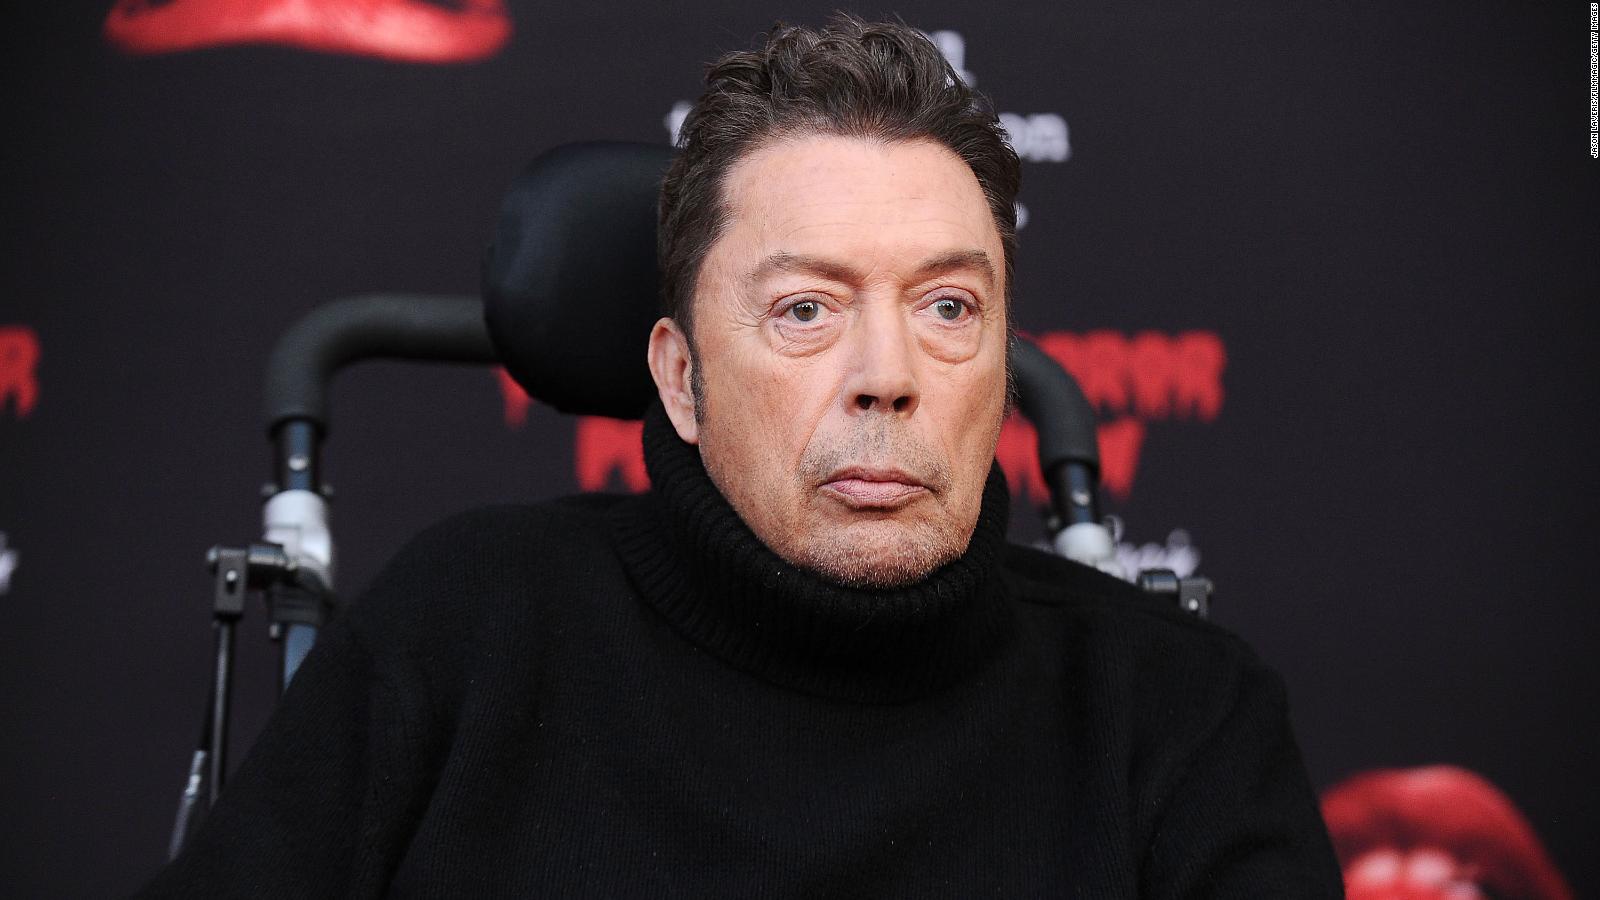 Tim Curry to join 'Rocky Horror' live stream to aid Democrats - CNN